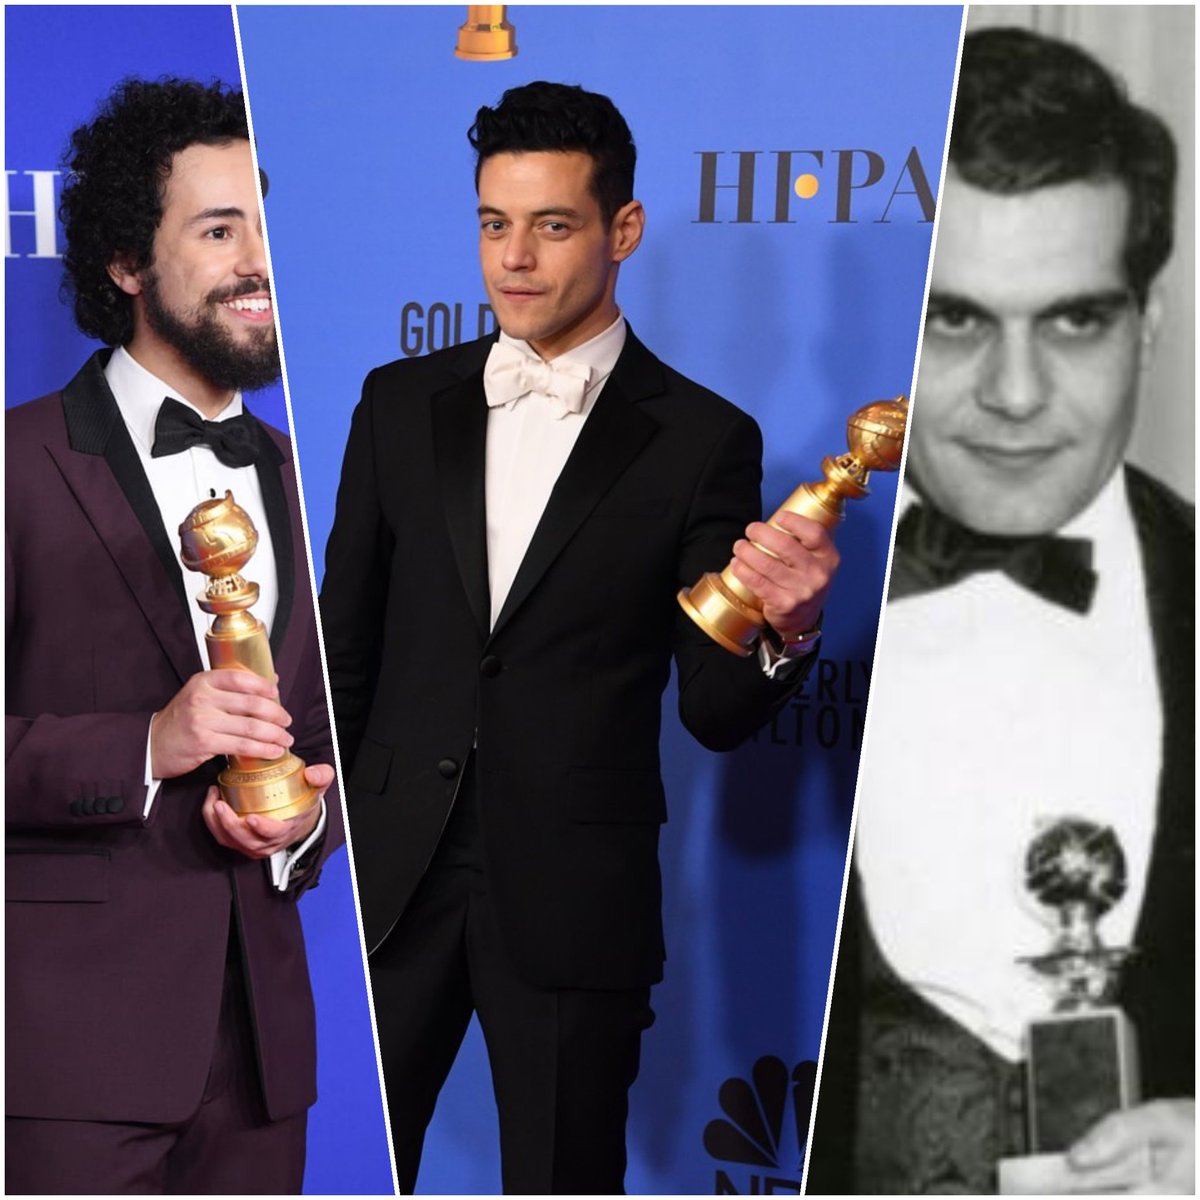 When you  run away from Egypt

#golden_globes
#RamyYoussef